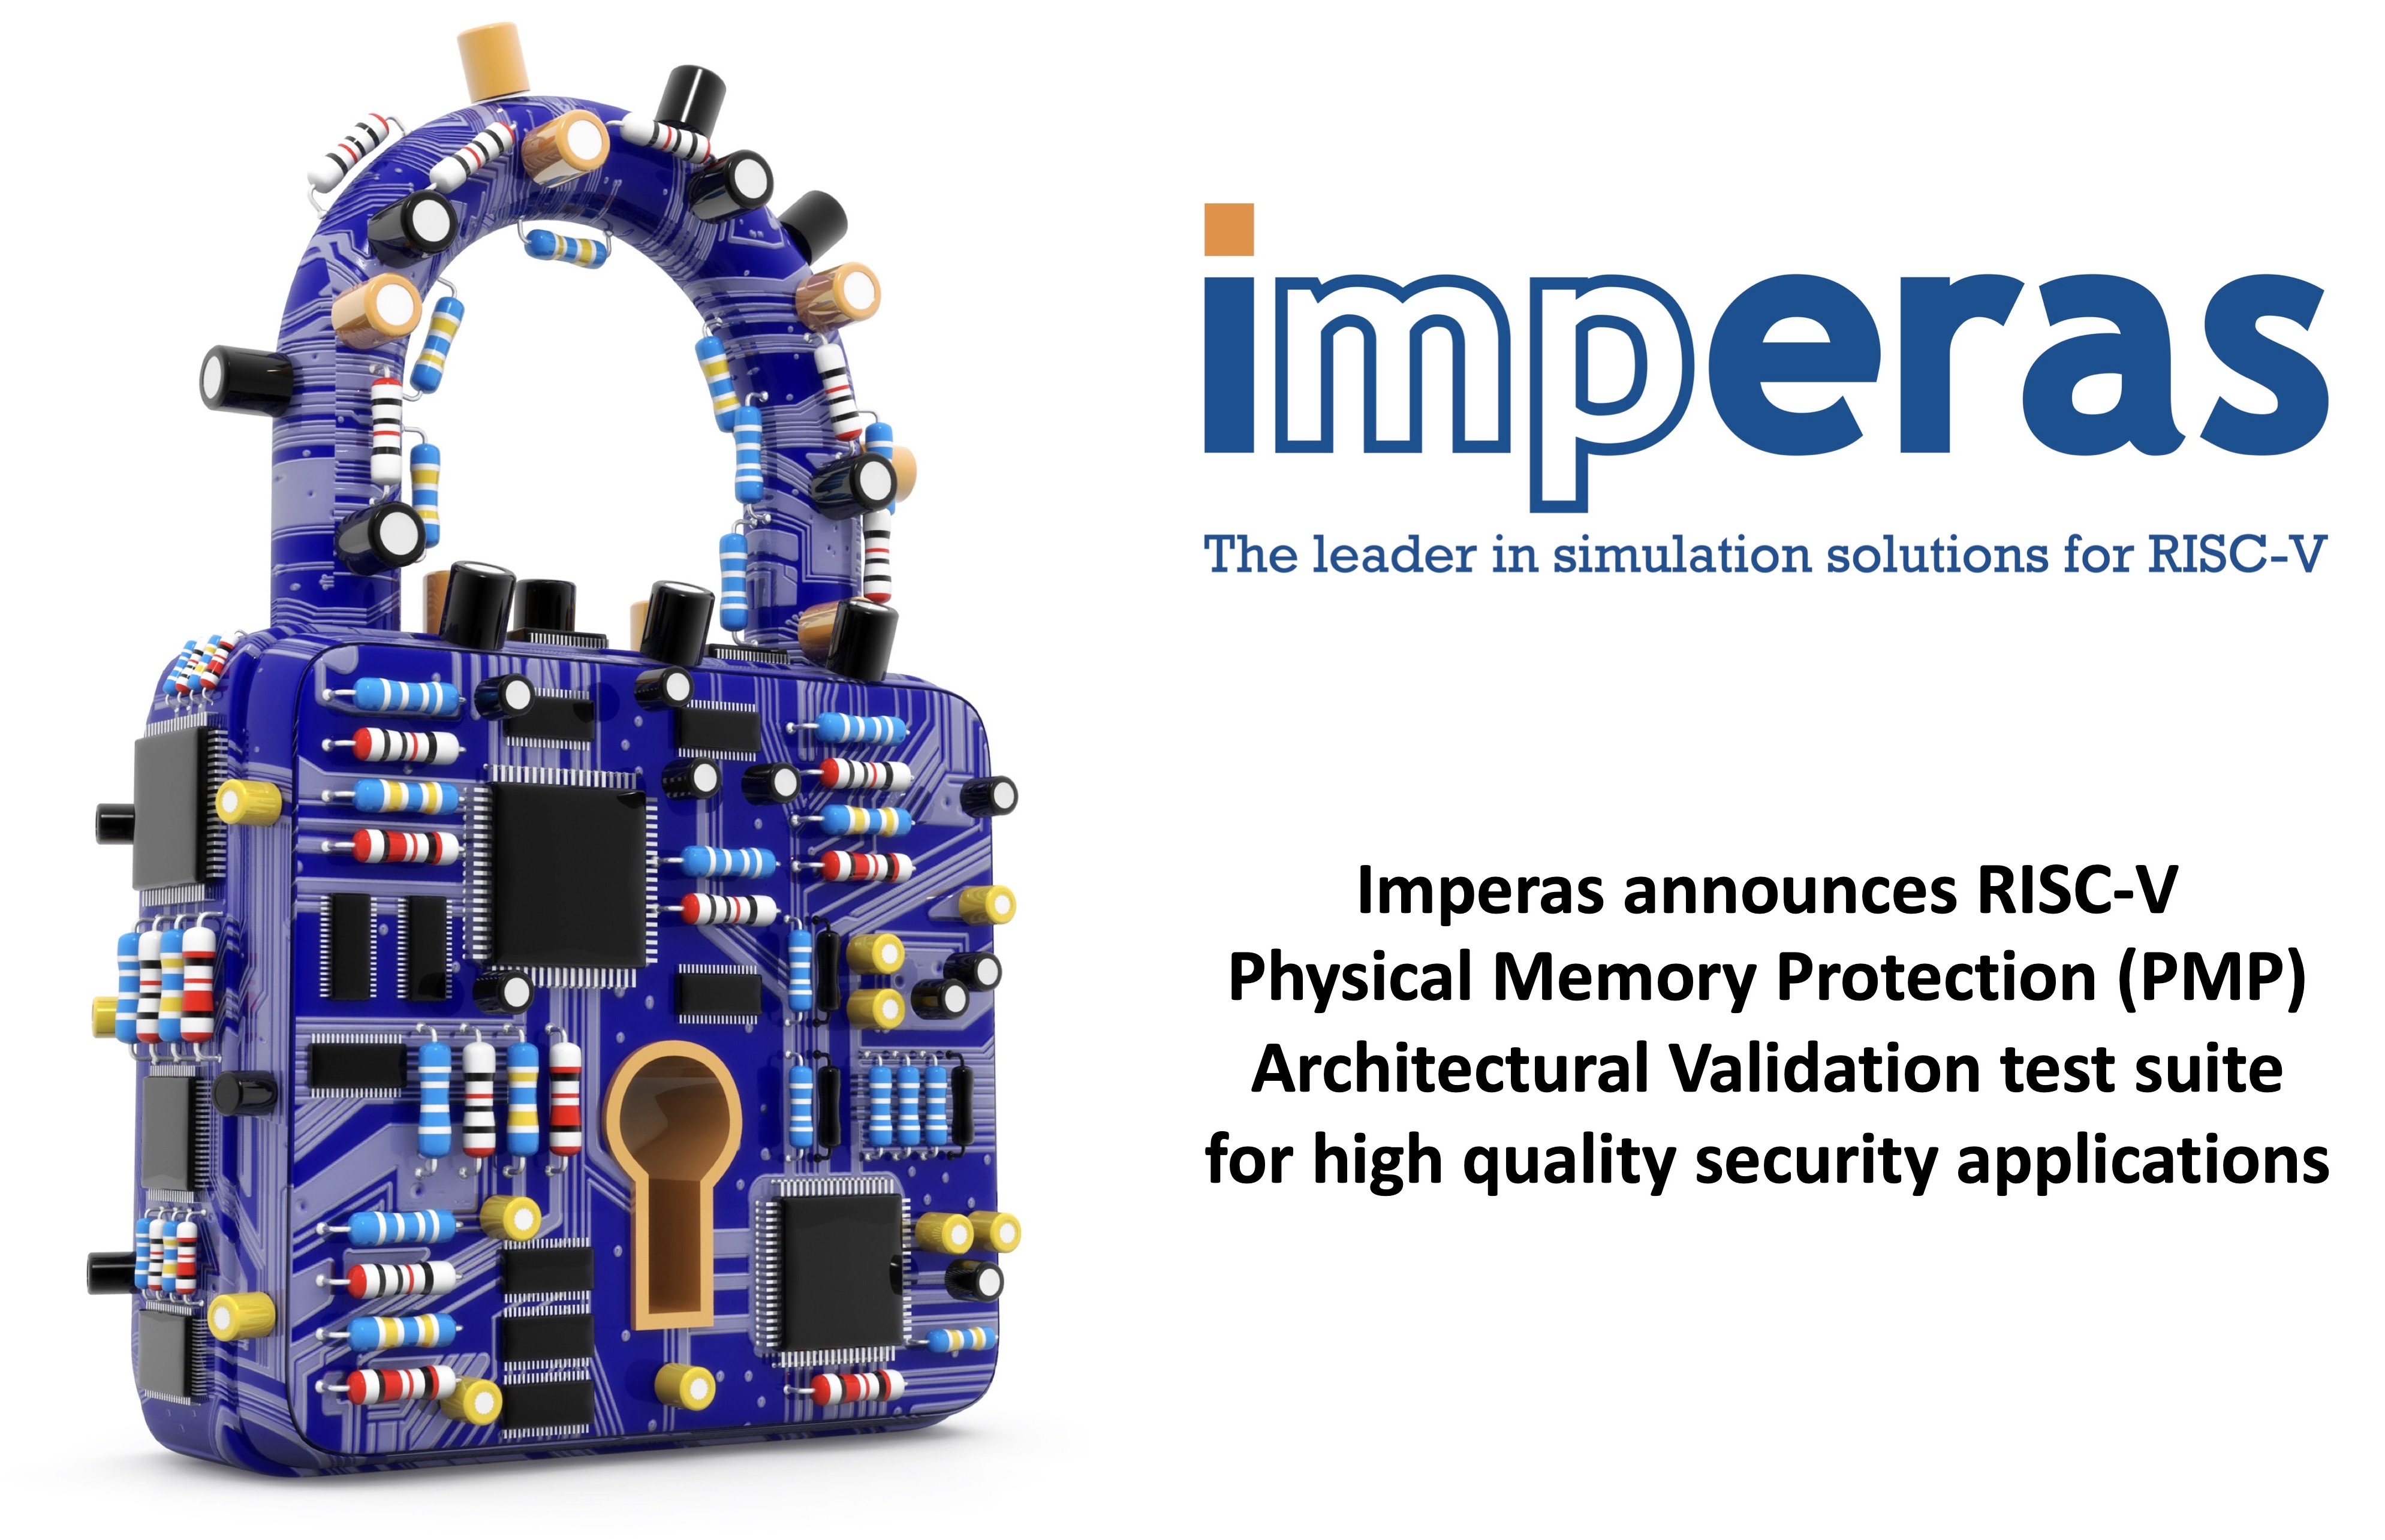 Imperas test suite for RISC-V Physical Memory Protection (PMP)